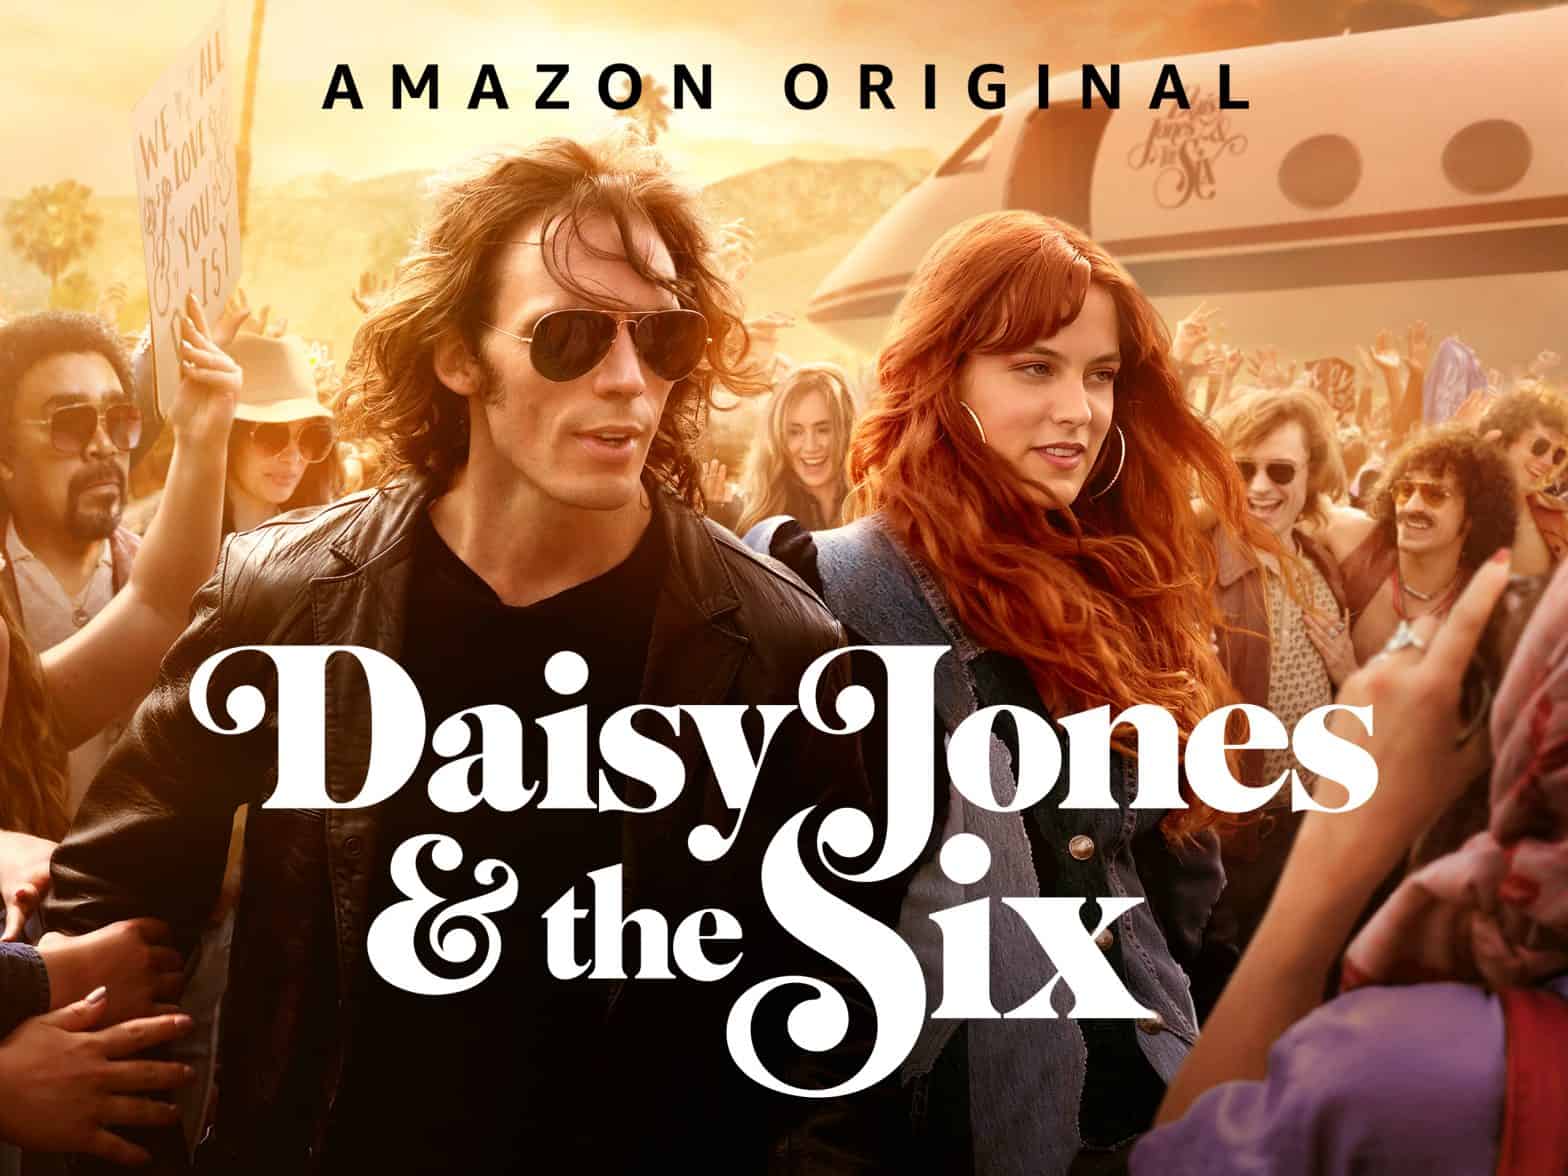 Poster for the show, Daisy Jones & the six